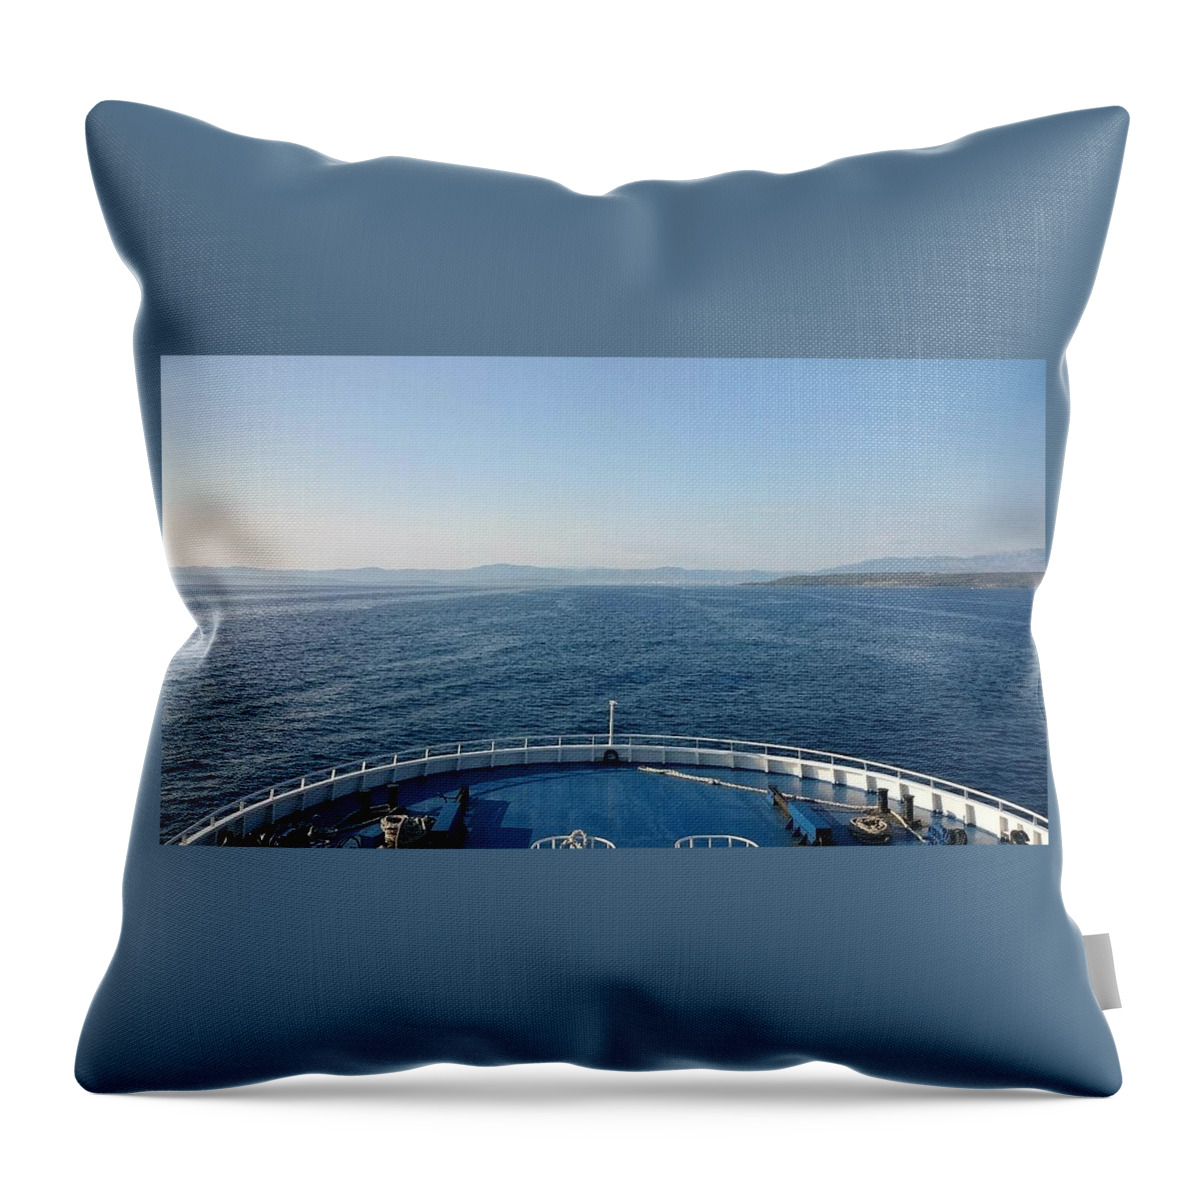 Sea Throw Pillow featuring the photograph Sea by Kristian Dolo